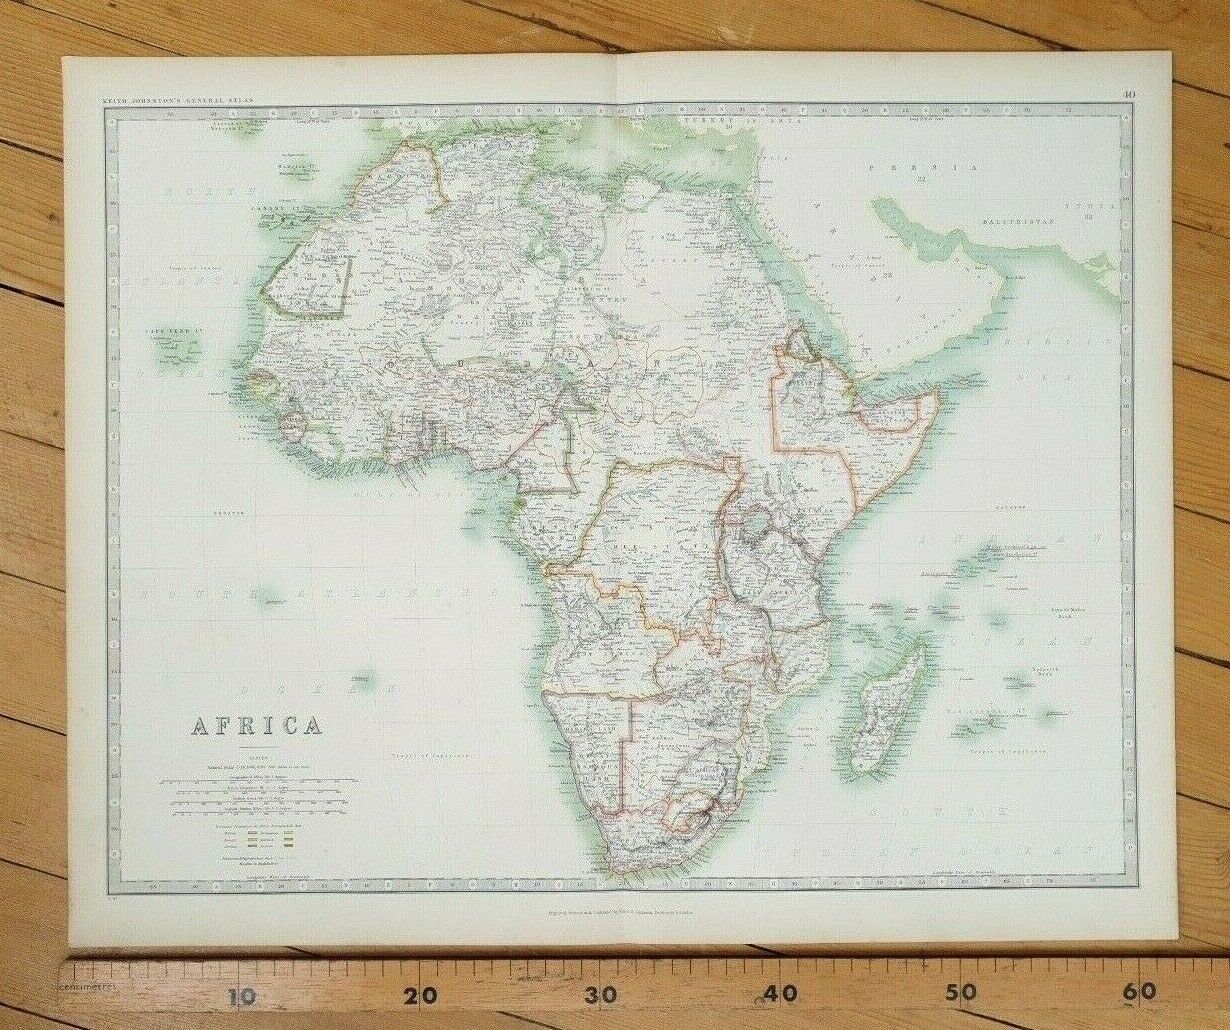 Africa Continent 1898 Victorian Map Keith Johnston's Royal Atlas Antique